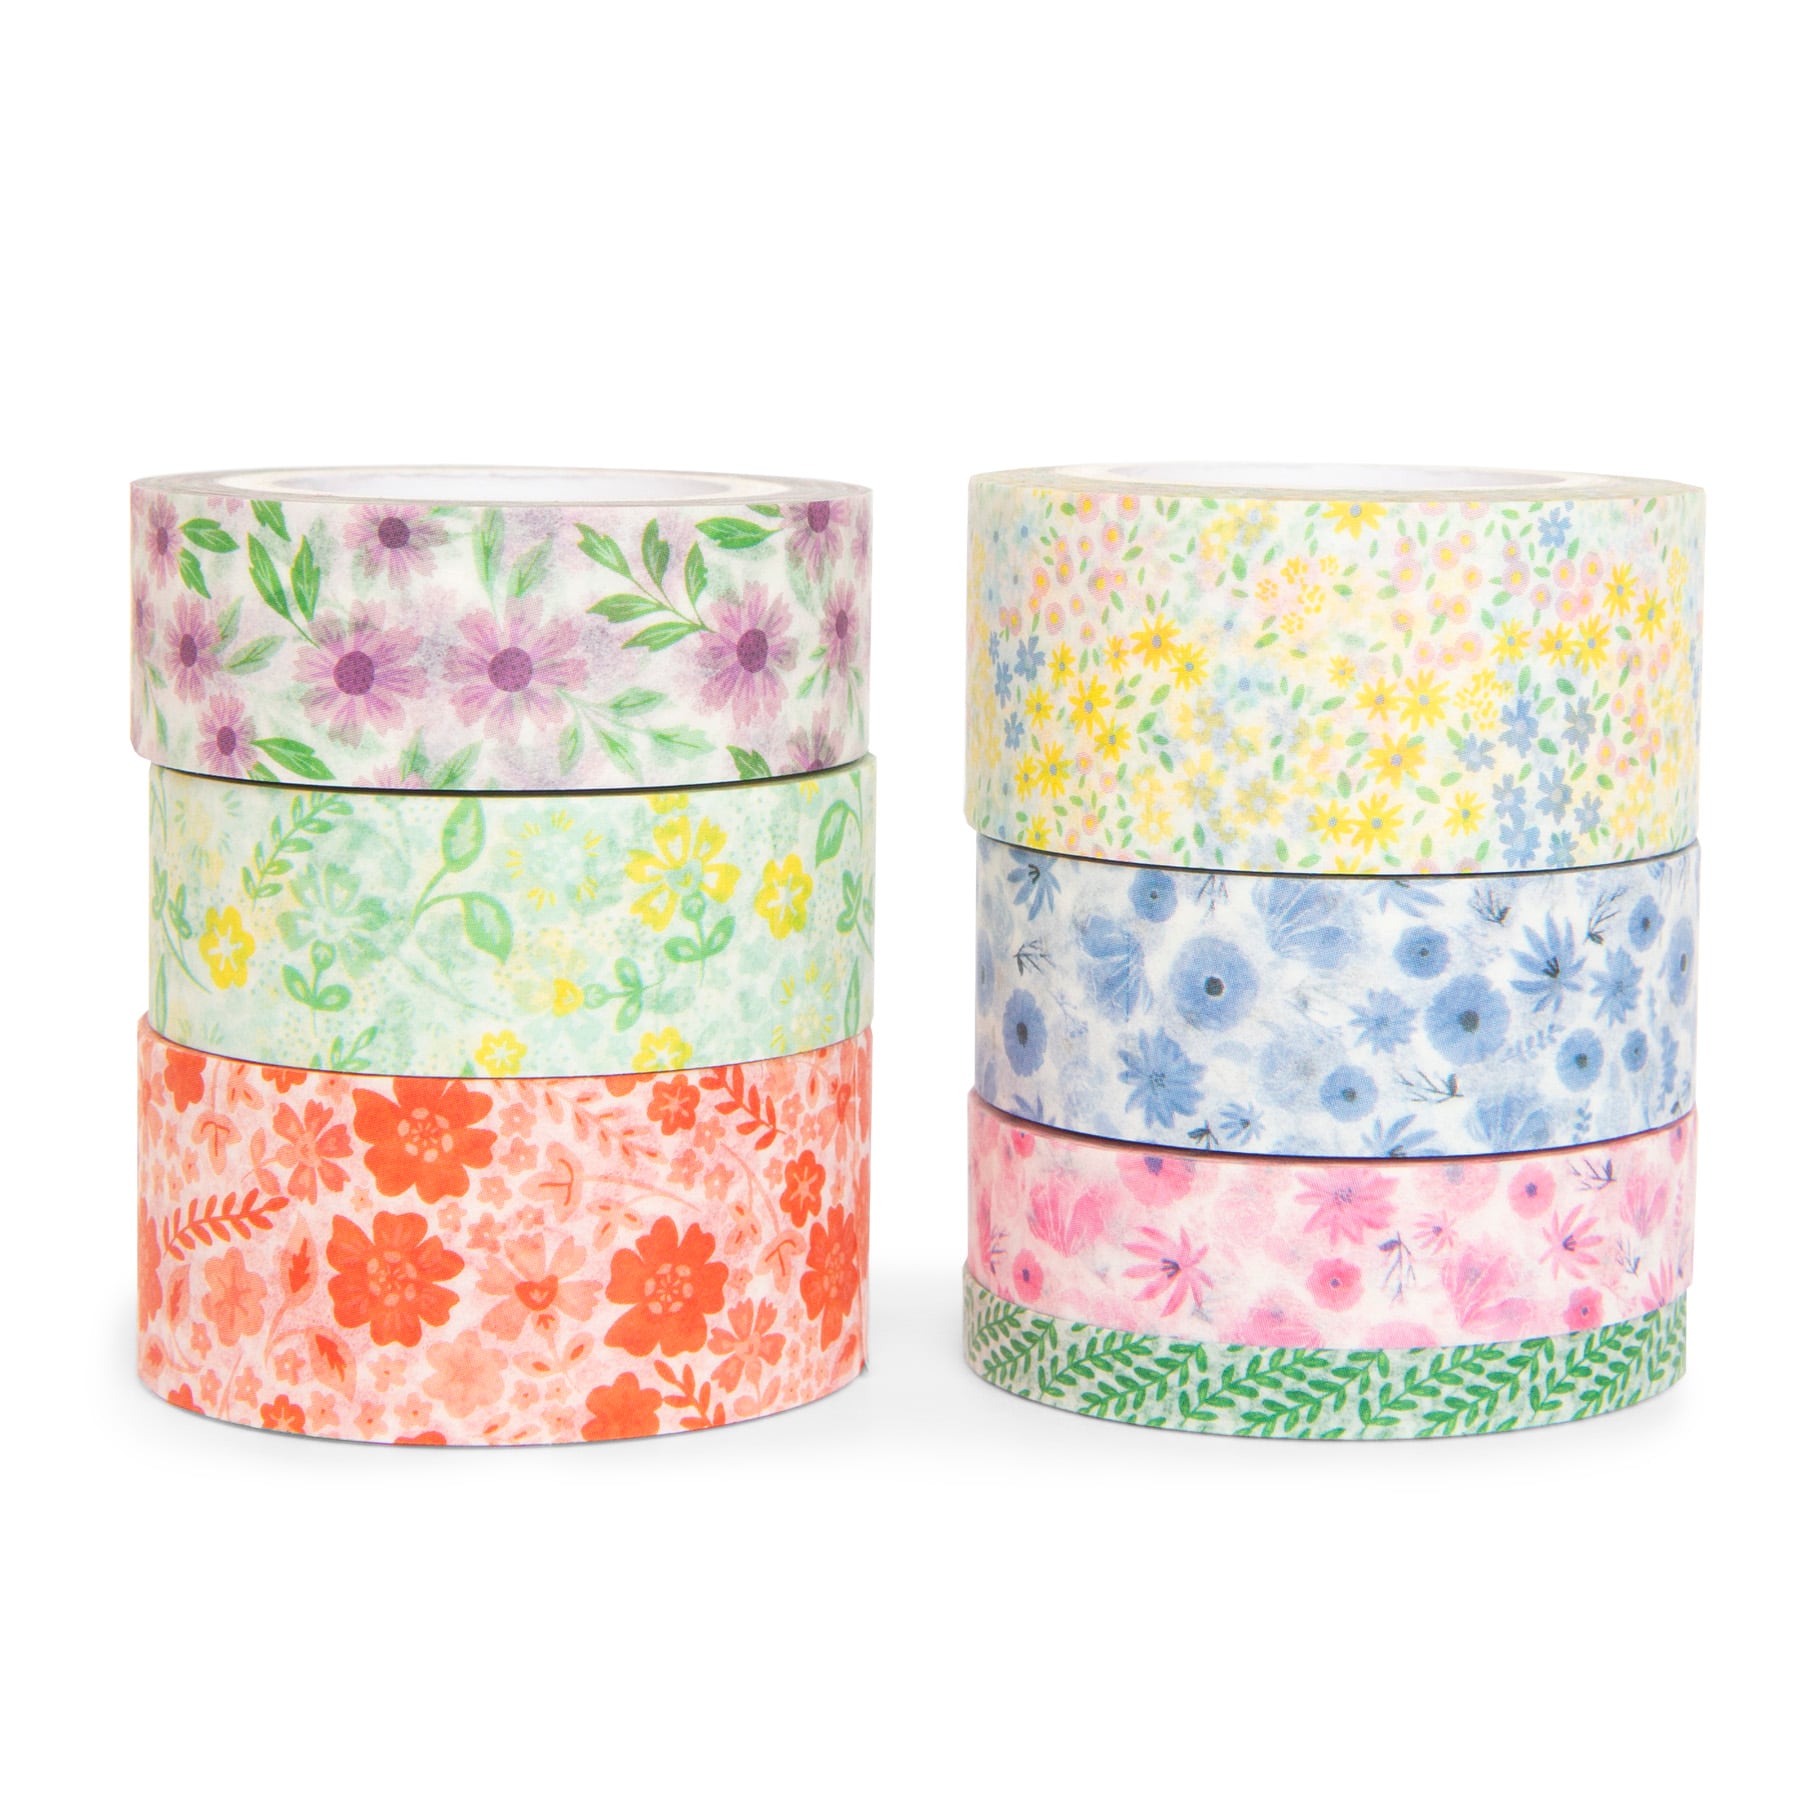 New in Pack Alaska Theme Crafting Washi Tape 3 different designs per pack 